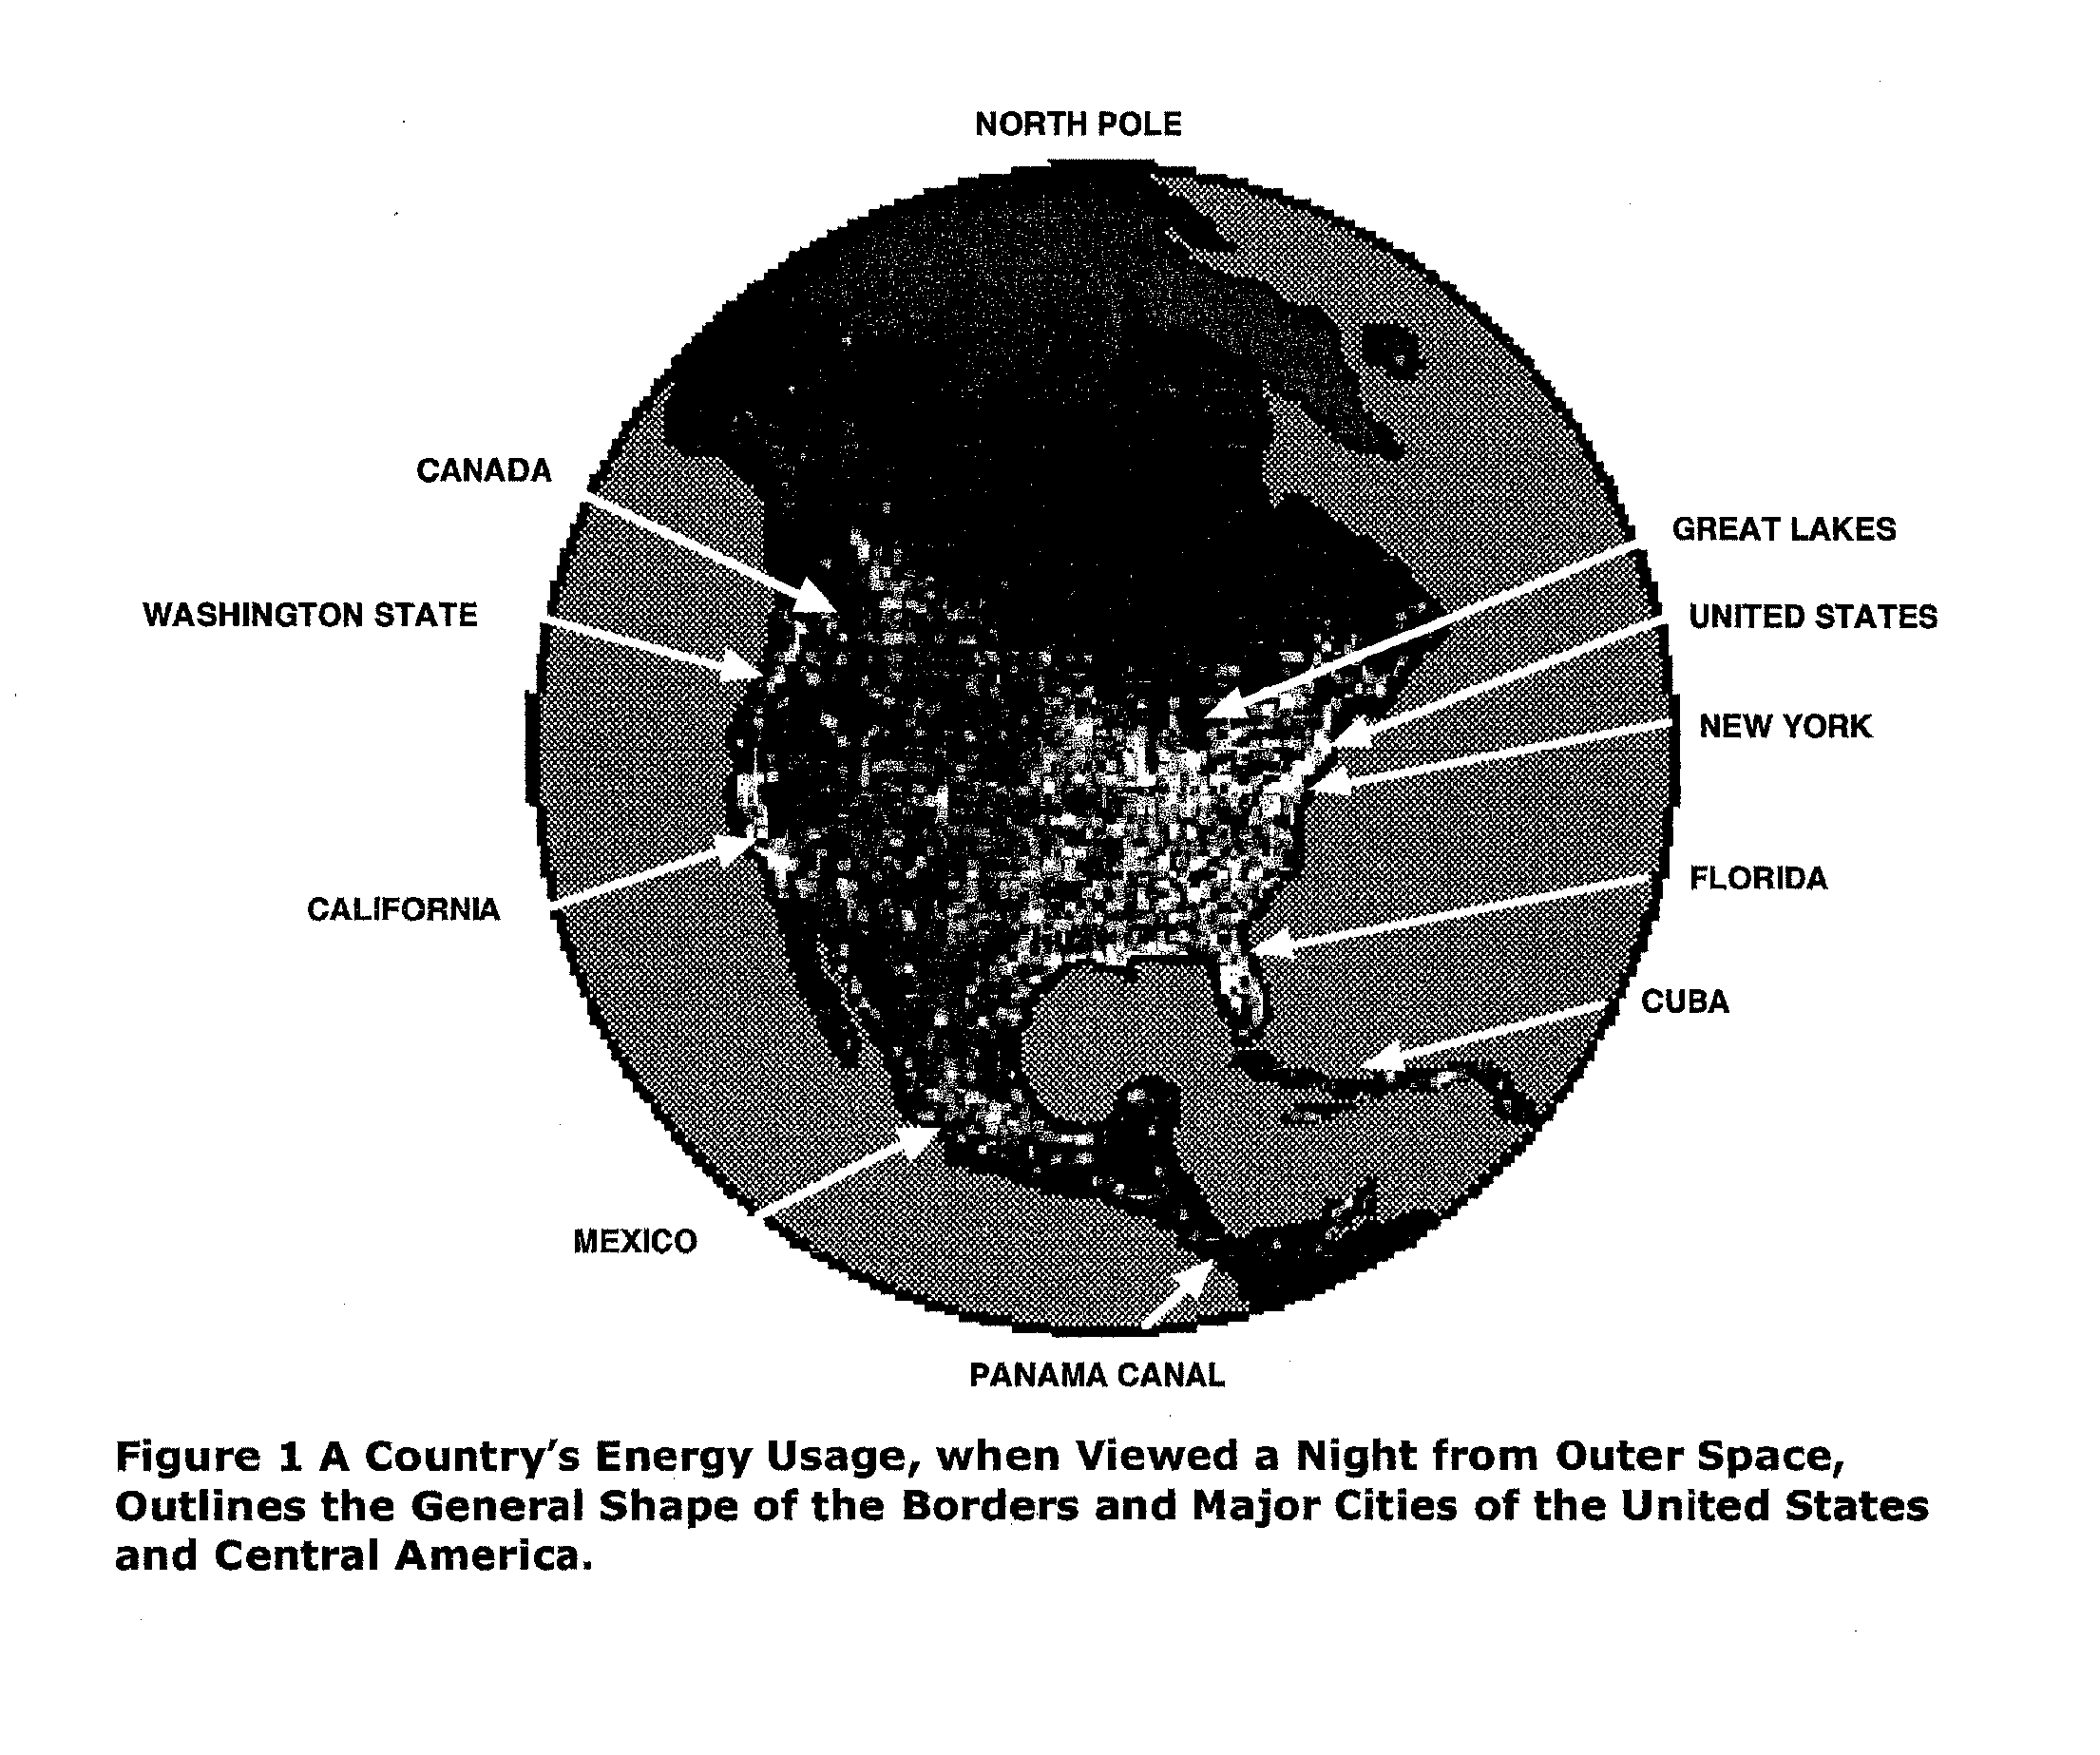 Systems, methods, and devices including modular, fixed and transportable structures incorporating solar and wind generation technologies for production of electricity